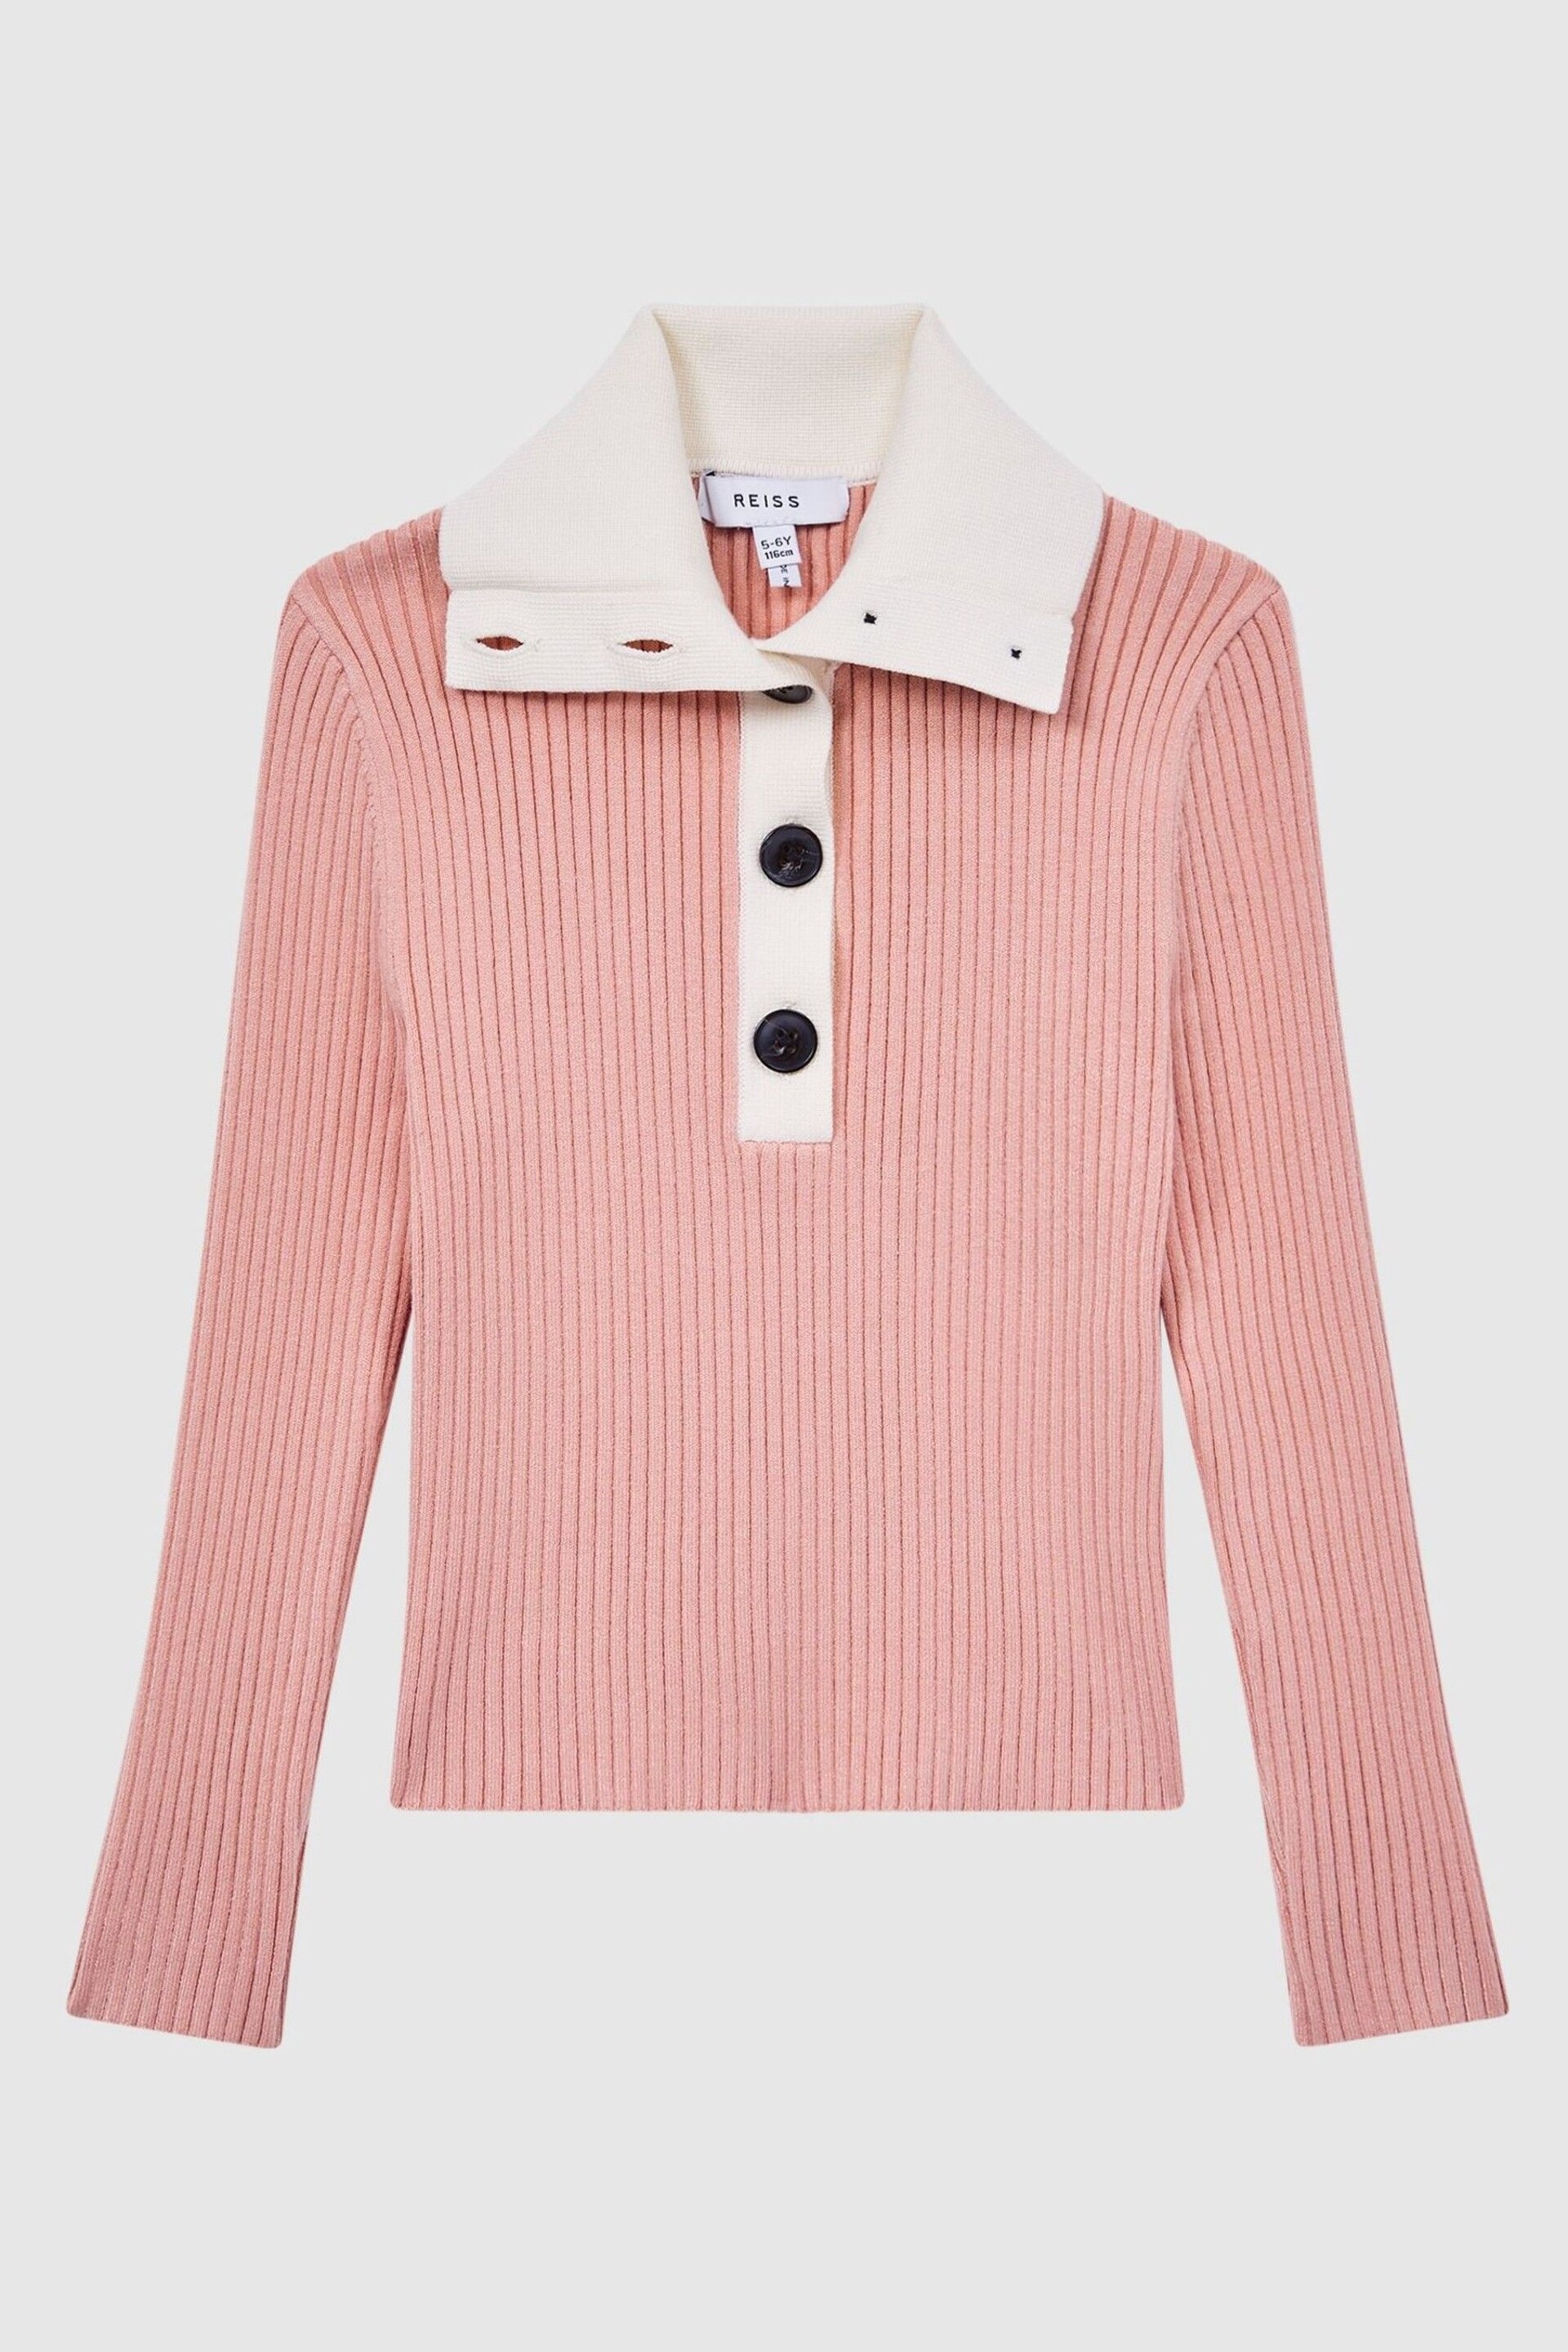 Reiss Pink Maia Junior Colourblock Knitted Top - Image 2 of 6